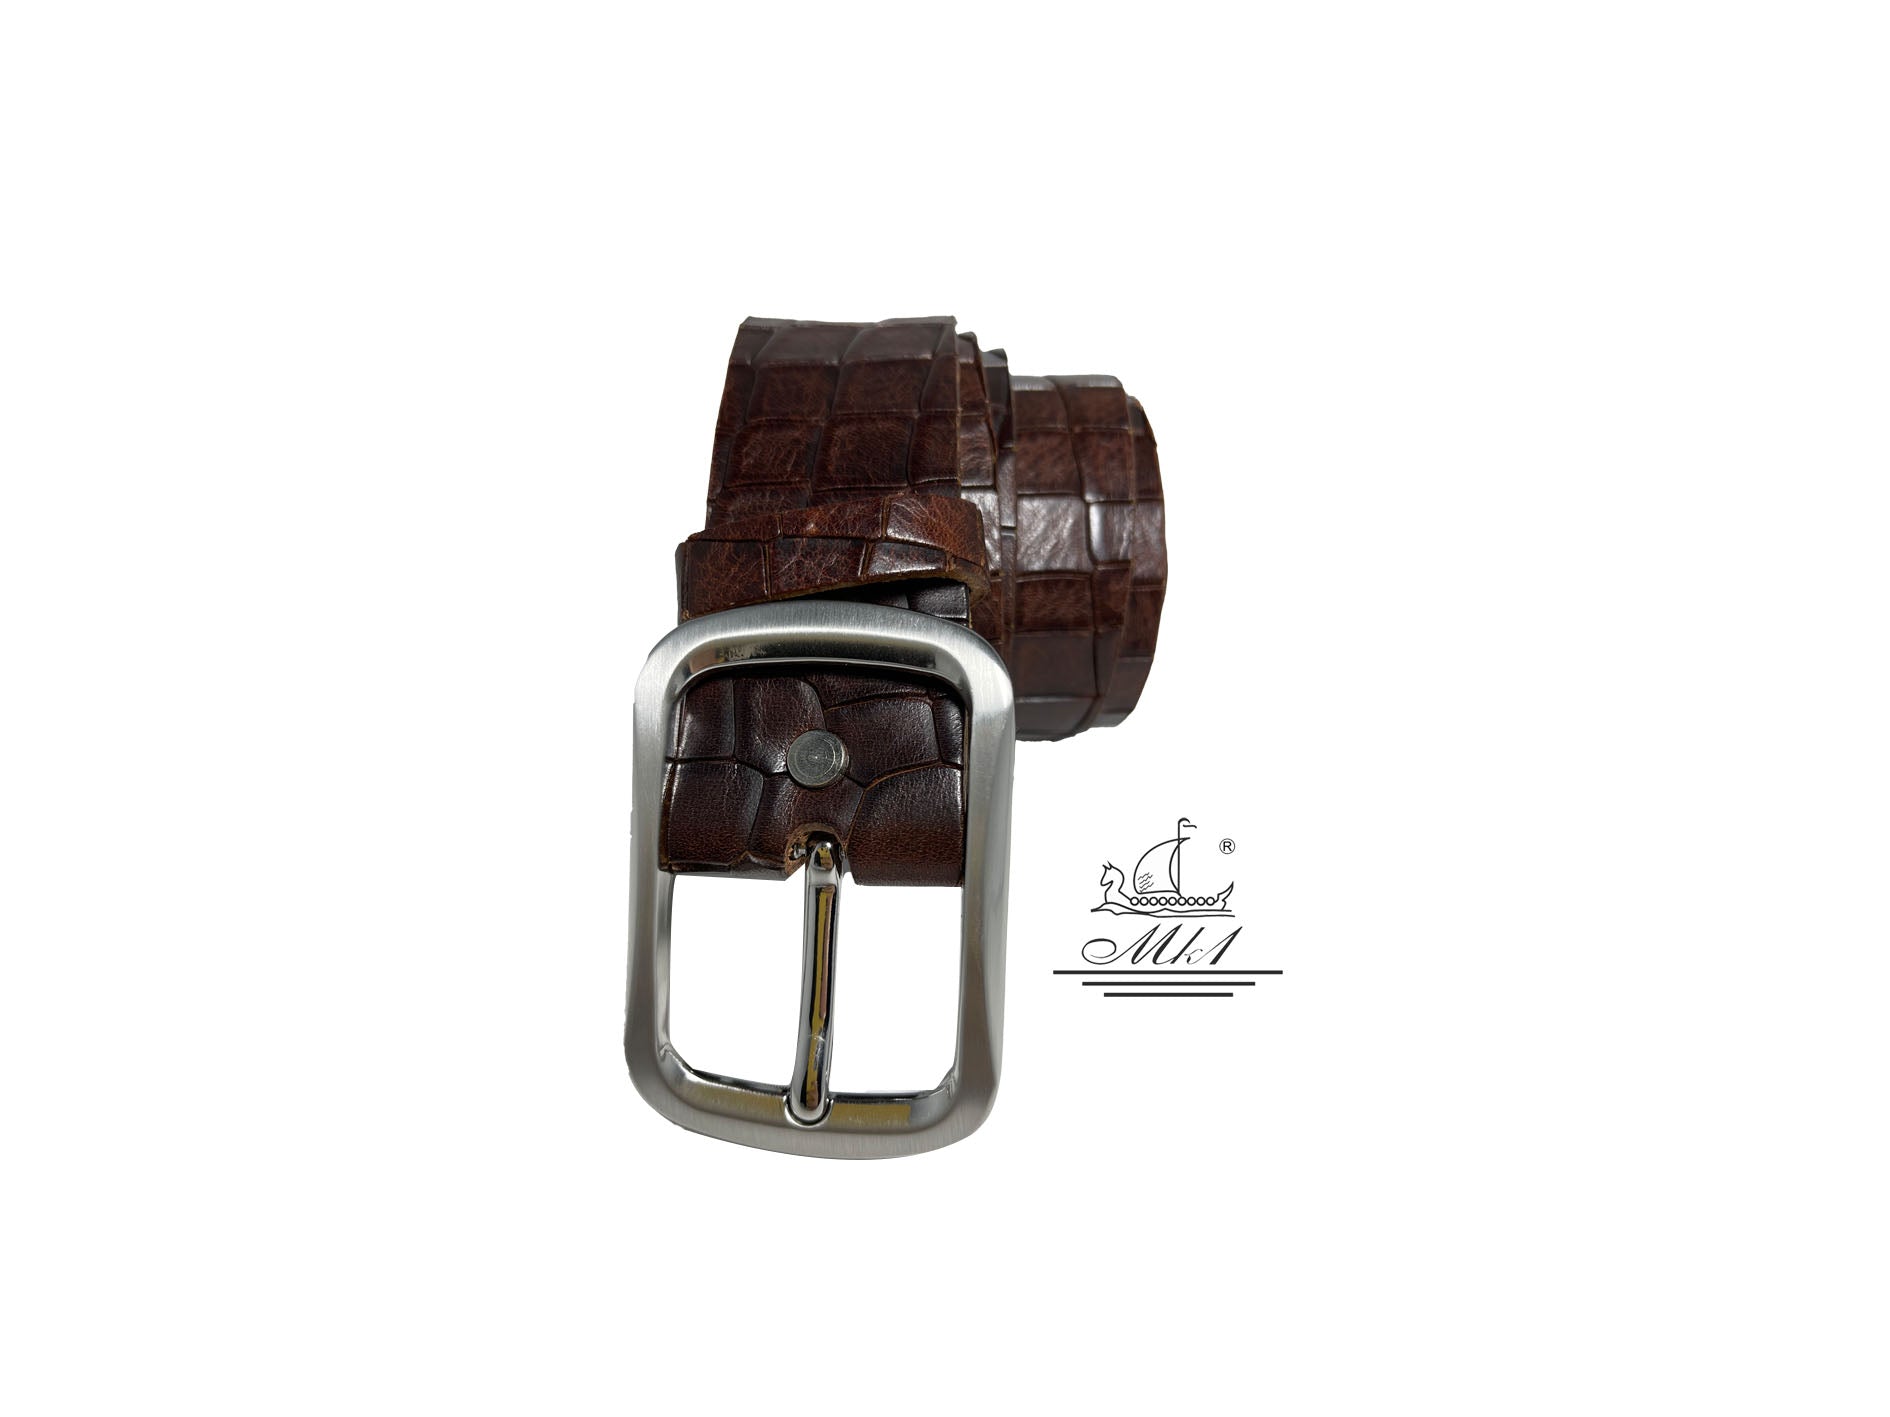 Women's 4cm wide belt handcrafted from brown leather with croco design. 100973/40B/KR